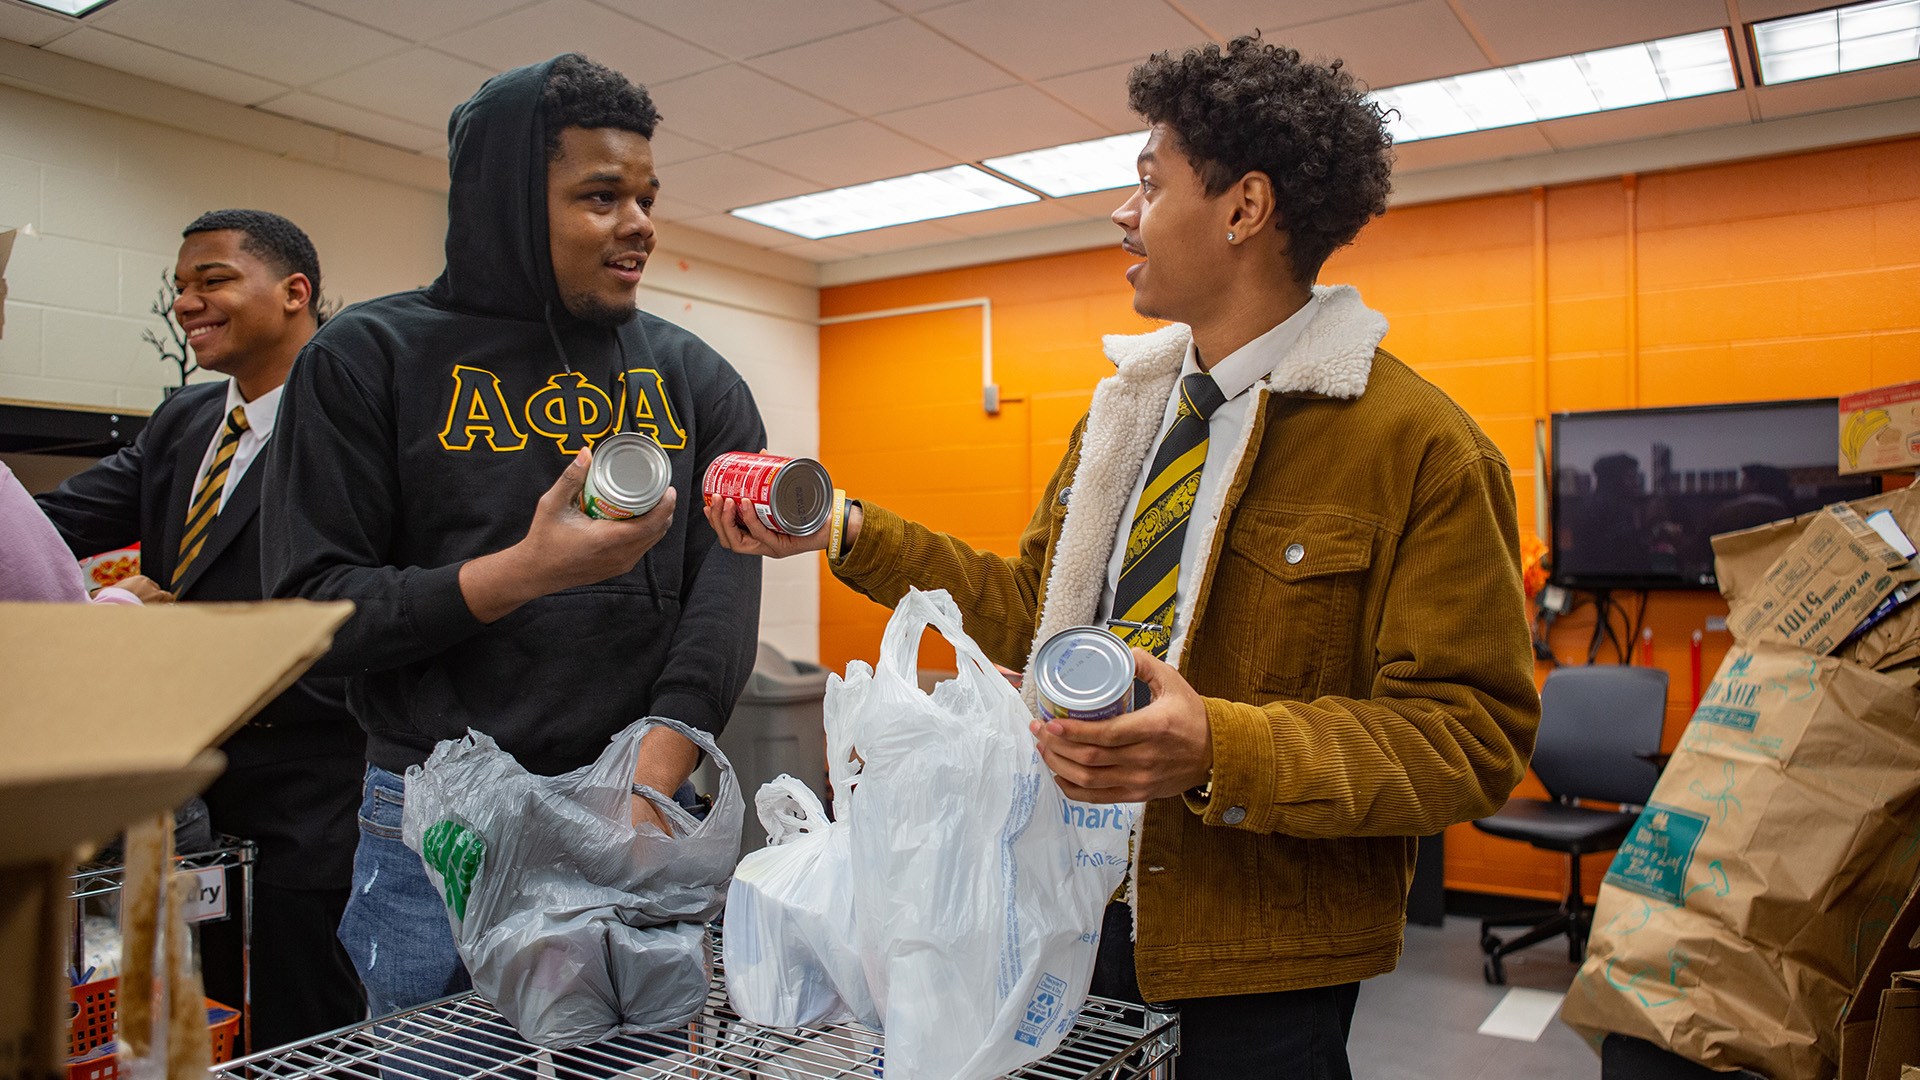 Two people empty bags of canned food to fill the shelves at a food pantry.